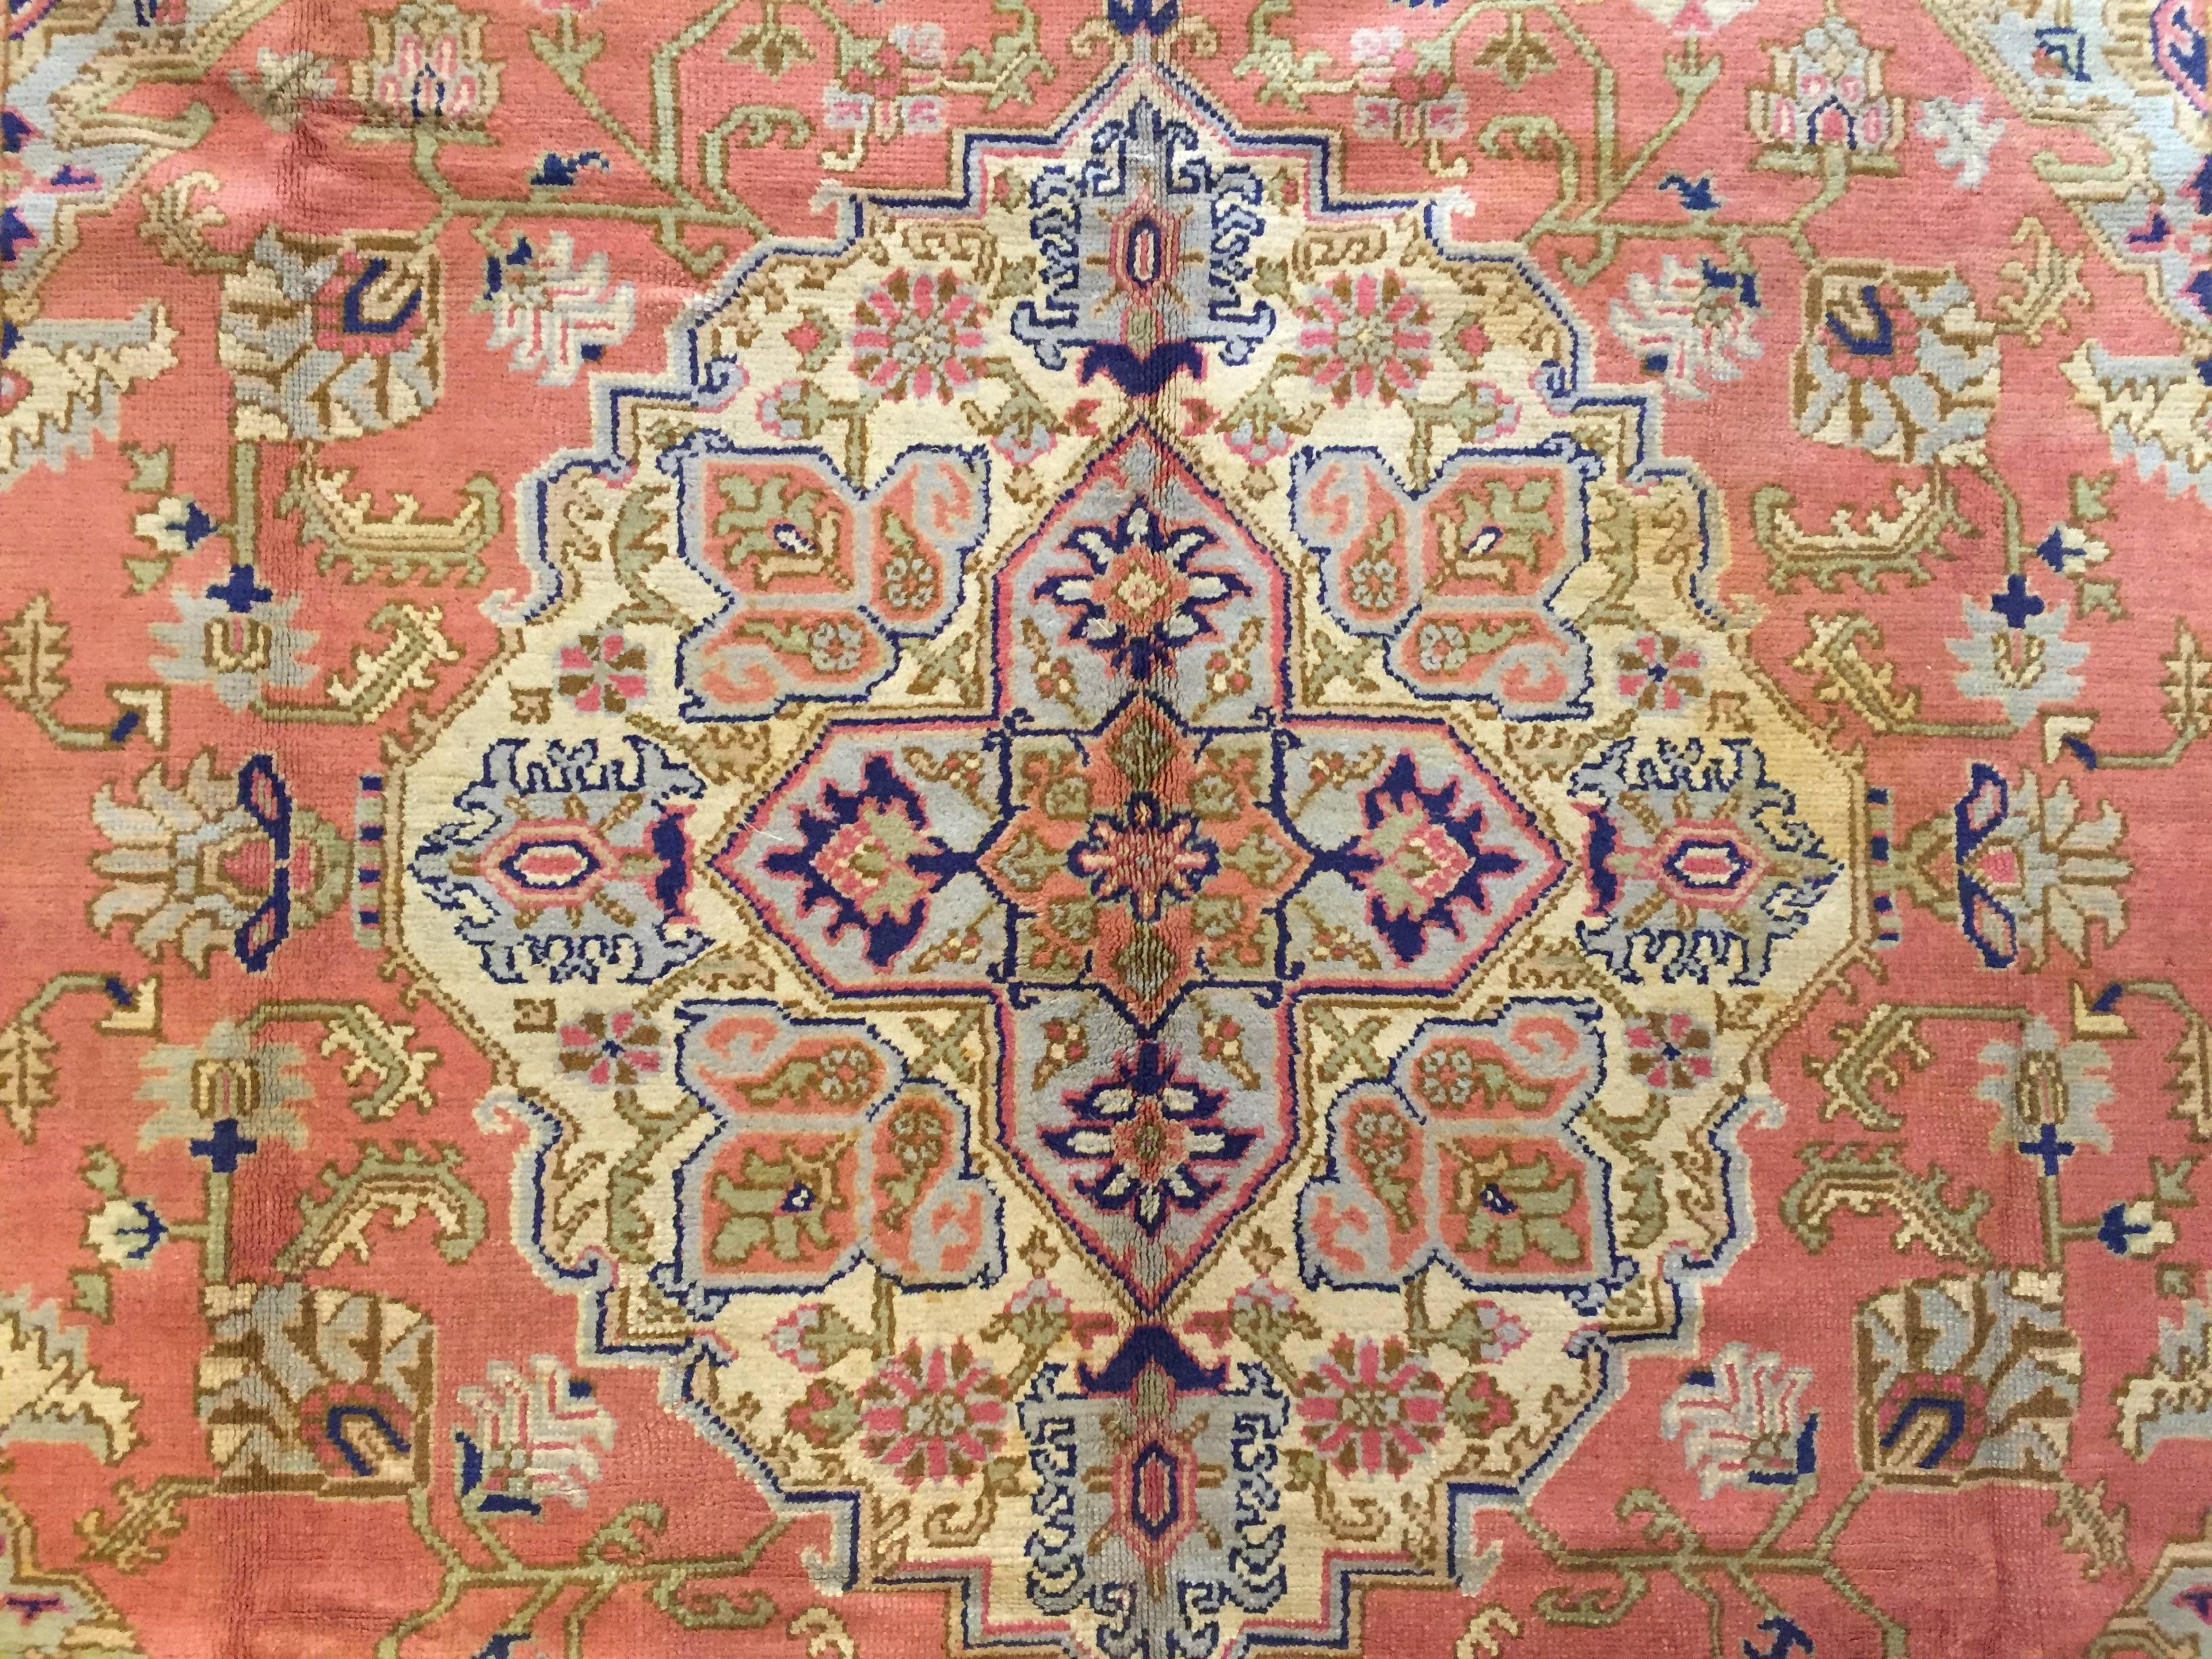 Oushak carpets originate in the small city of Oushak in central-western Anatolia, just south of Istanbul. Unlike most Turkish rugs, the Oushak rugs were strongly influenced by the Persian tradition. Almost since the beginning of the Ottoman empire,